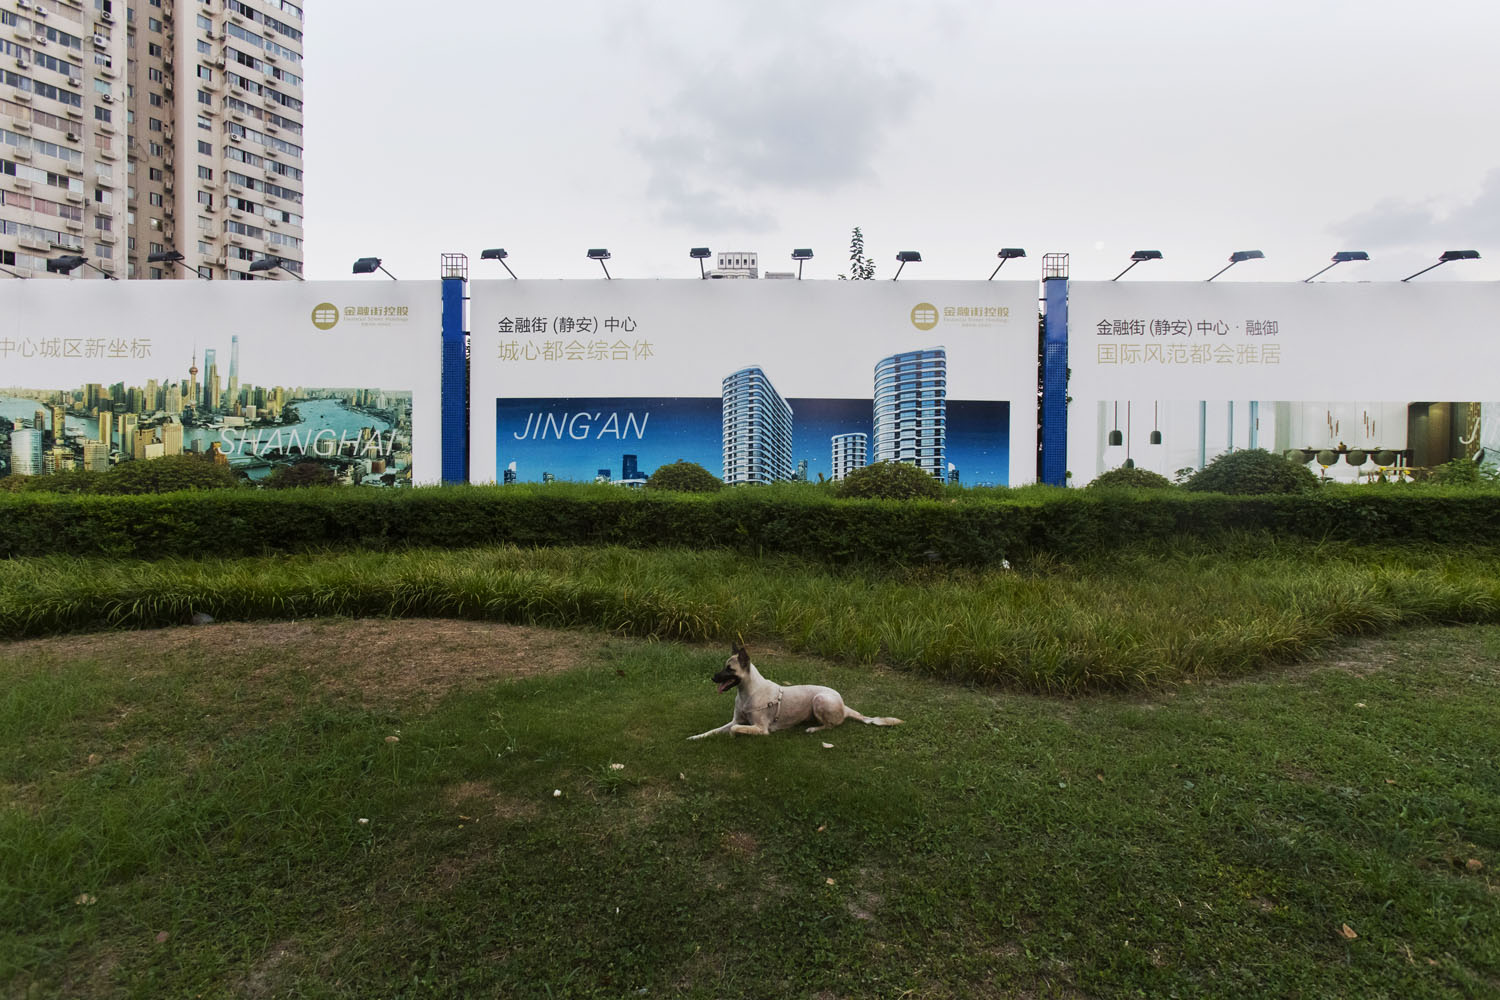 Dog laying in front of a construction wall in Jing'An. Shanghai, China. 2016.